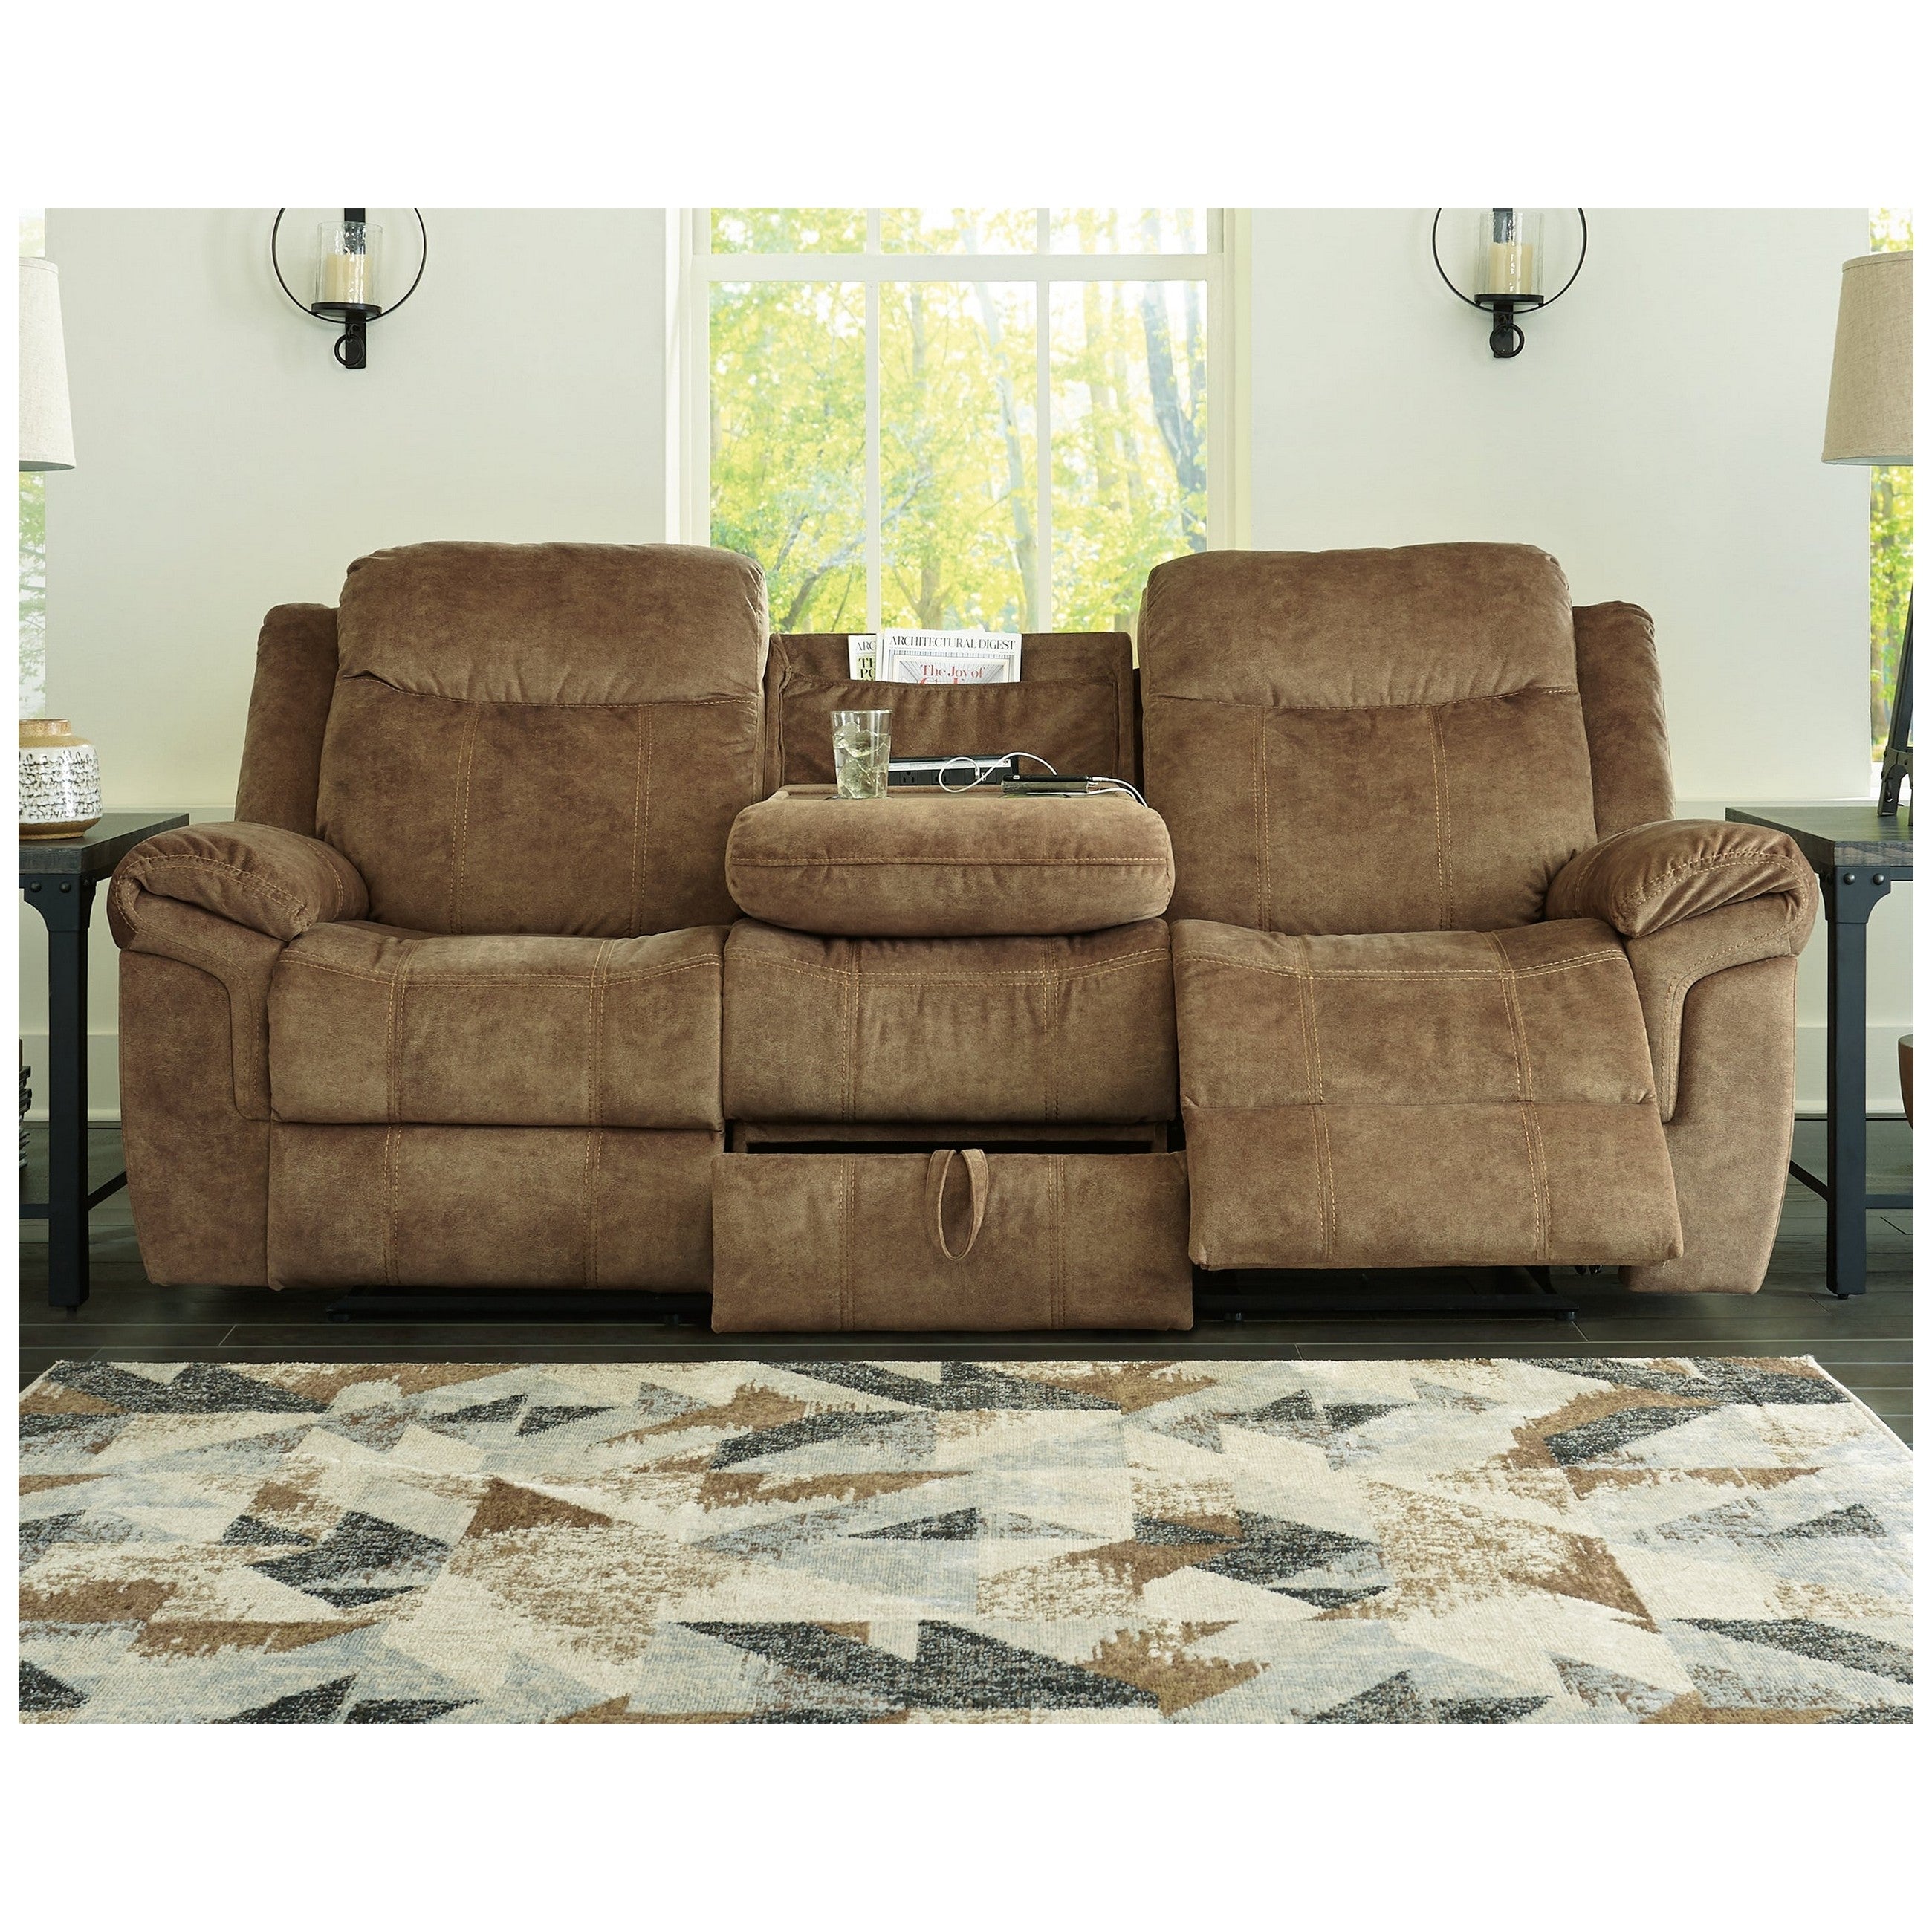 Huddle-Up Reclining Sofa with Drop Down Table Ash-8230489